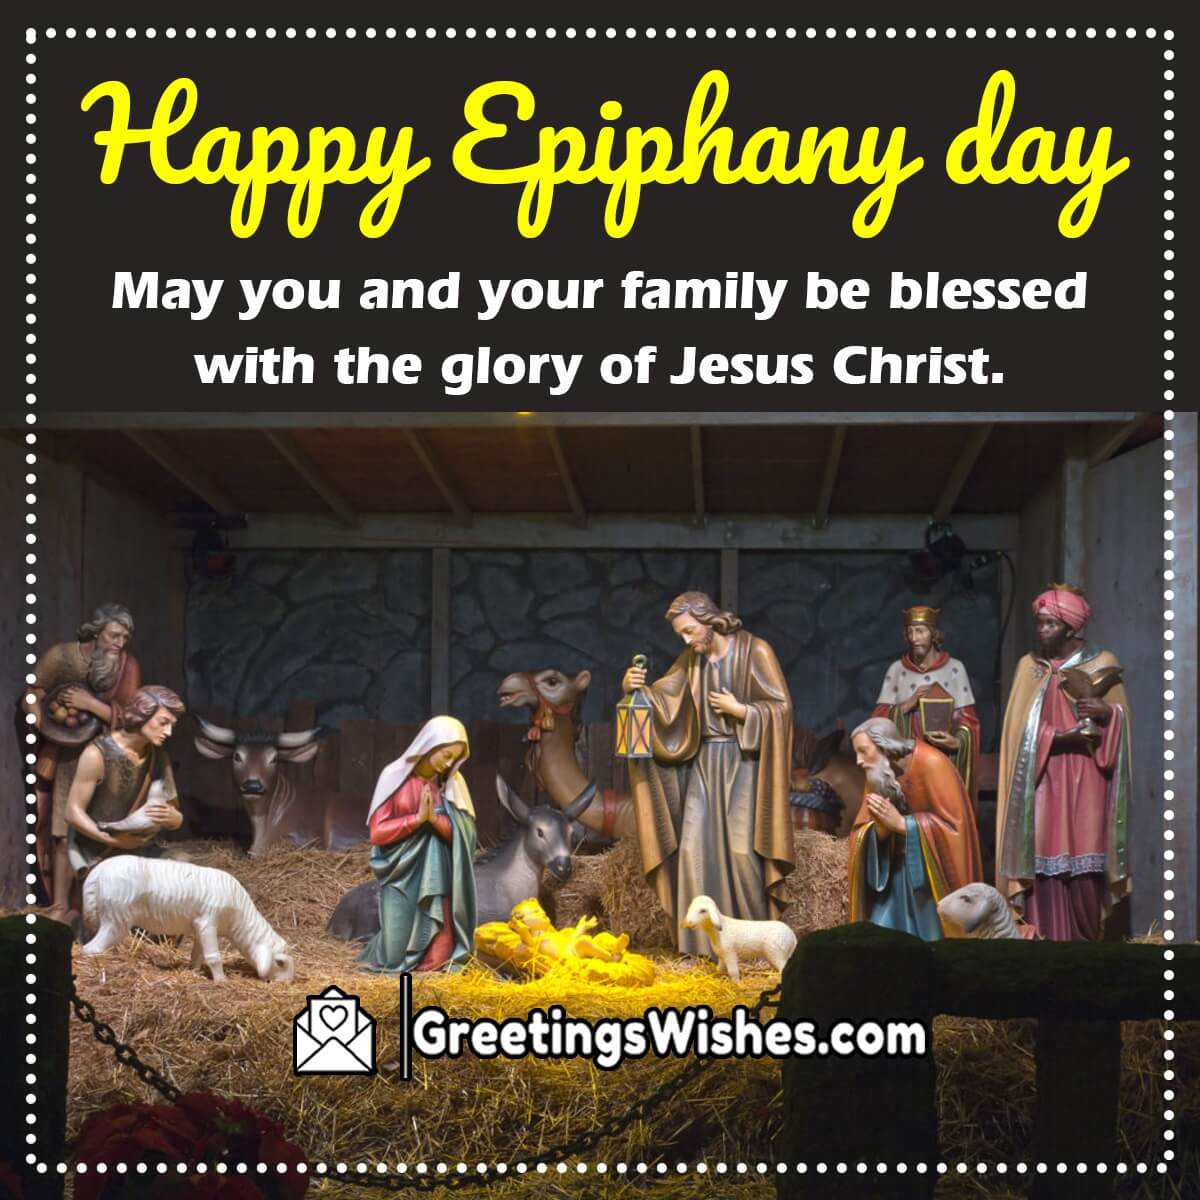 Happy Epiphany Day Wishes And Quotes (6th January)